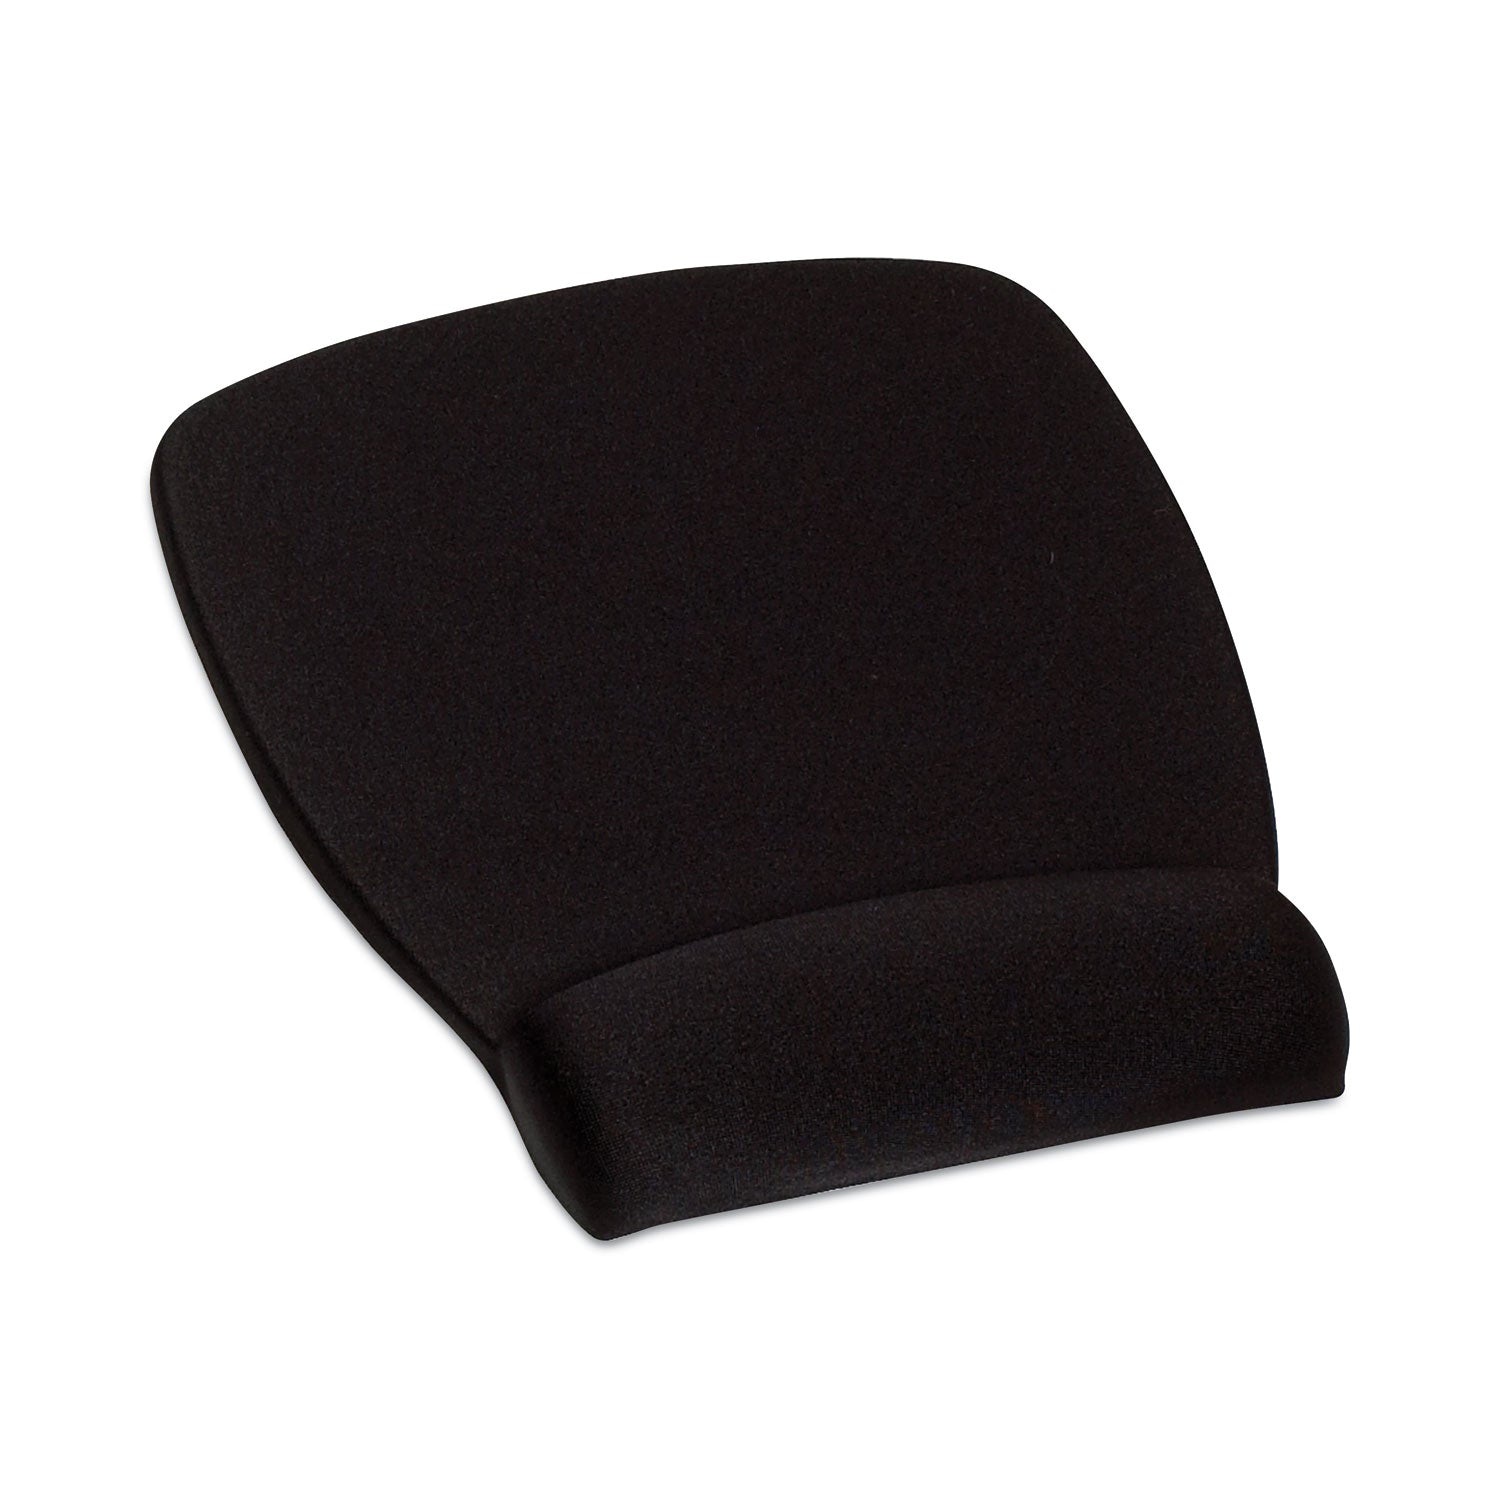 Antimicrobial Foam Mouse Pad with Wrist Rest, 8.62 x 6.75, Black - 